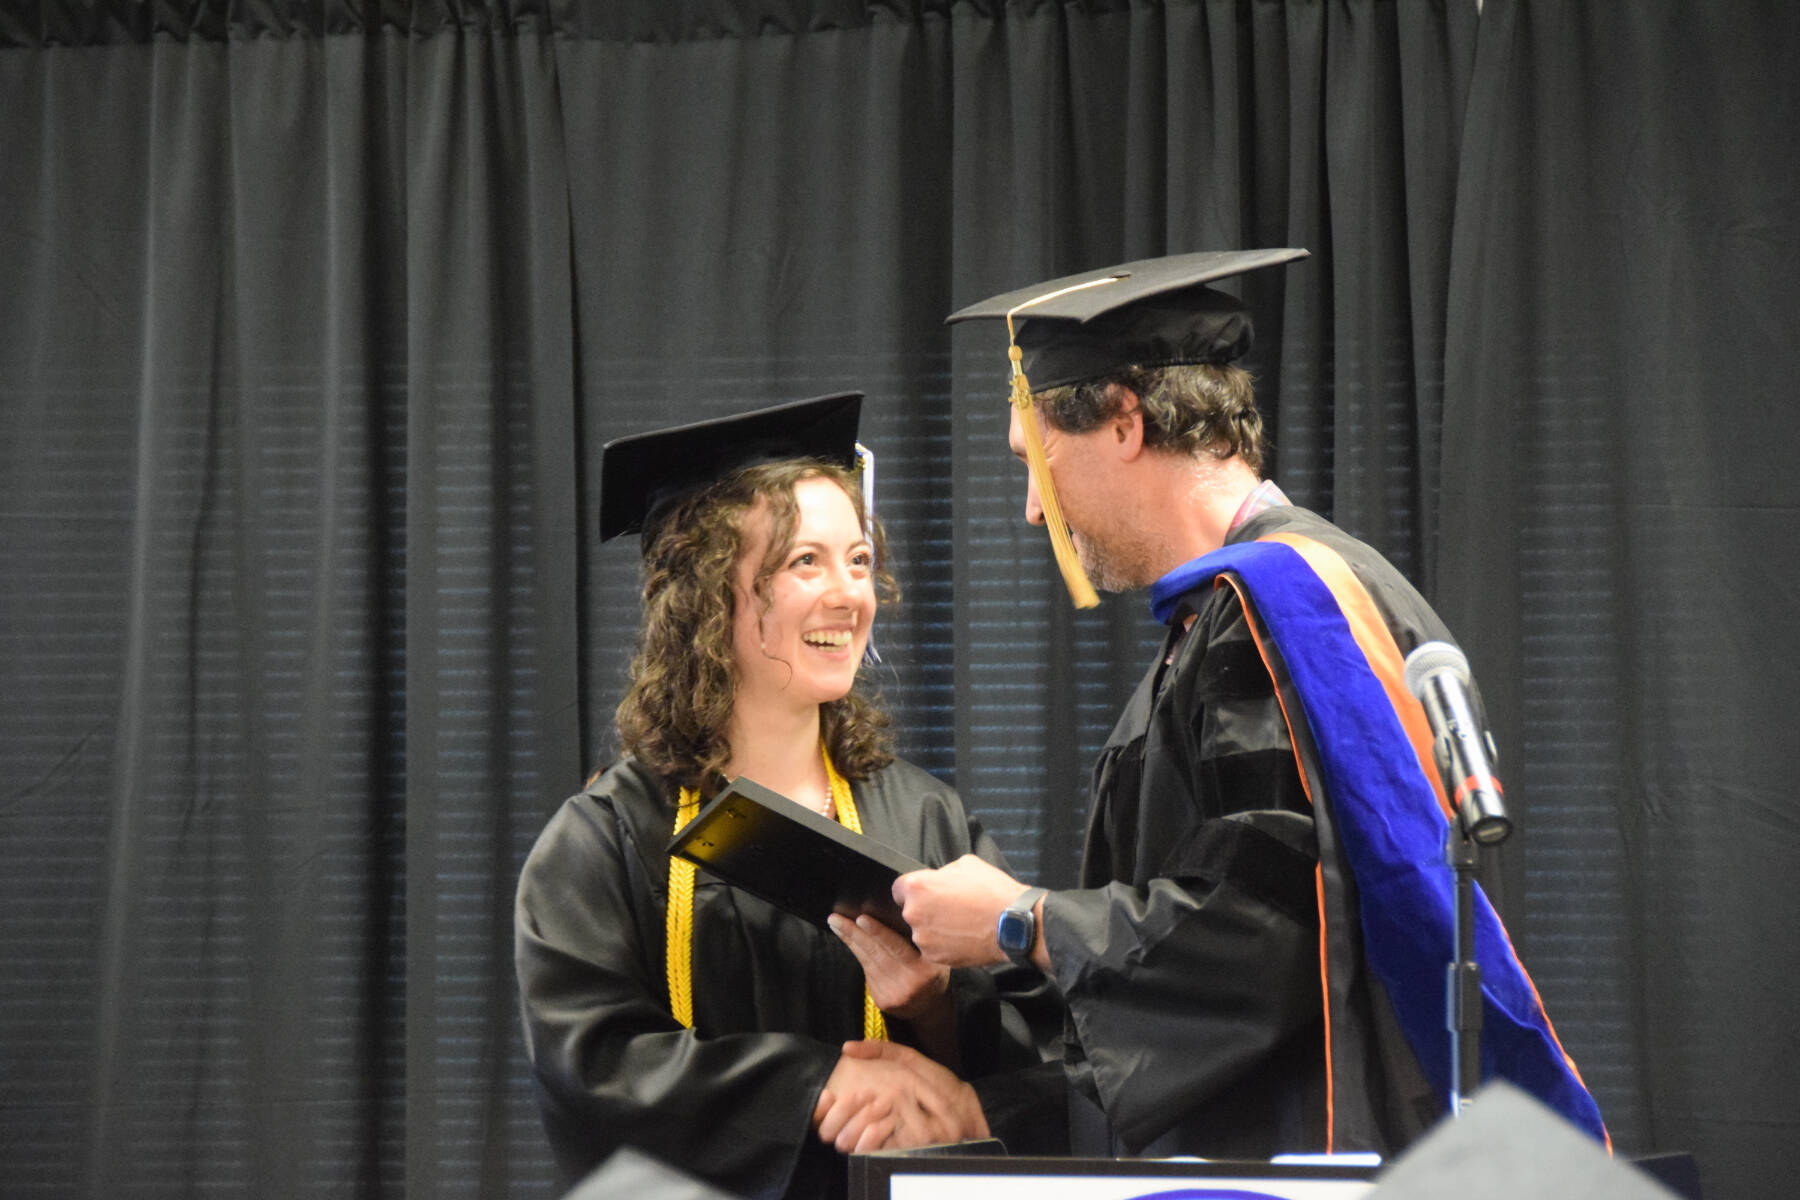 Kachemak Bay Campus Assistant Professor of Mathematics Dr. Jeff Johnson (right) presents the KBC Faculty Choice Award to valedictorian Elizabeth Rozeboom (left) during the 2023 KBC Commencement on Wednesday, May 10, 2023, in Homer, Alaska. (Photo by Delcenia Cosman/Homer News)